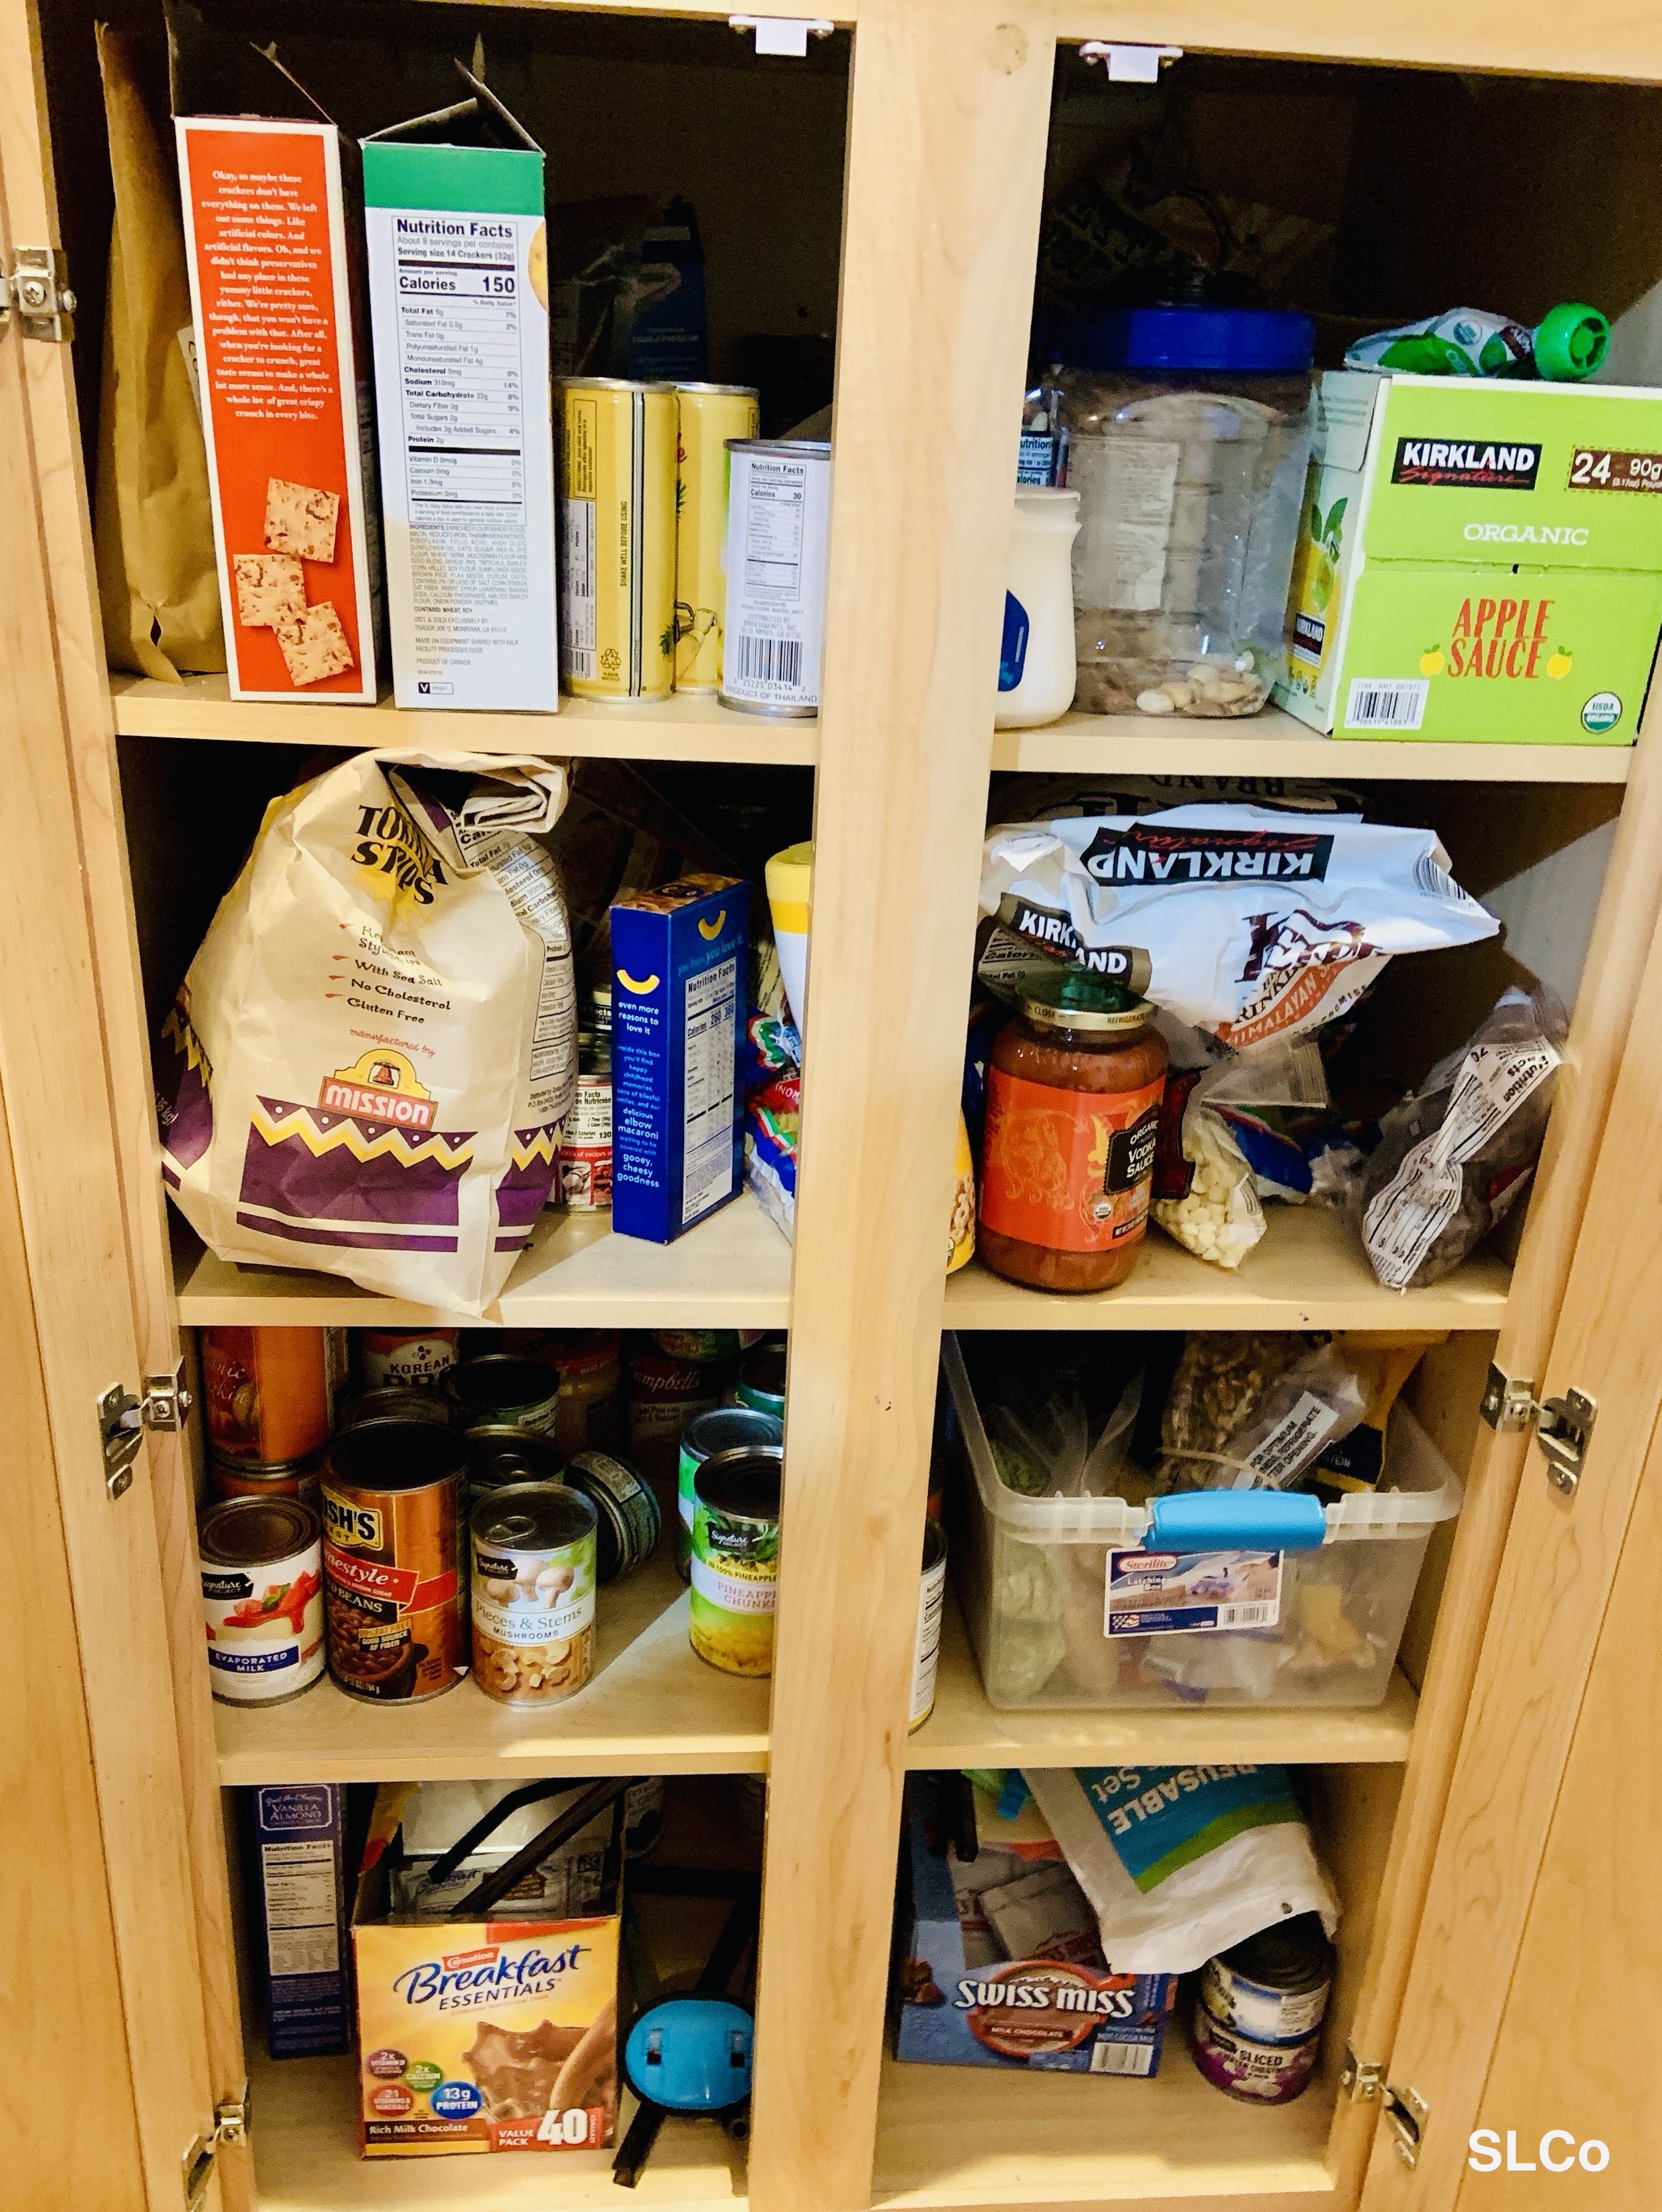 Kitchen cabinet 4 shelves high overflowing with cereal, chips, and cans